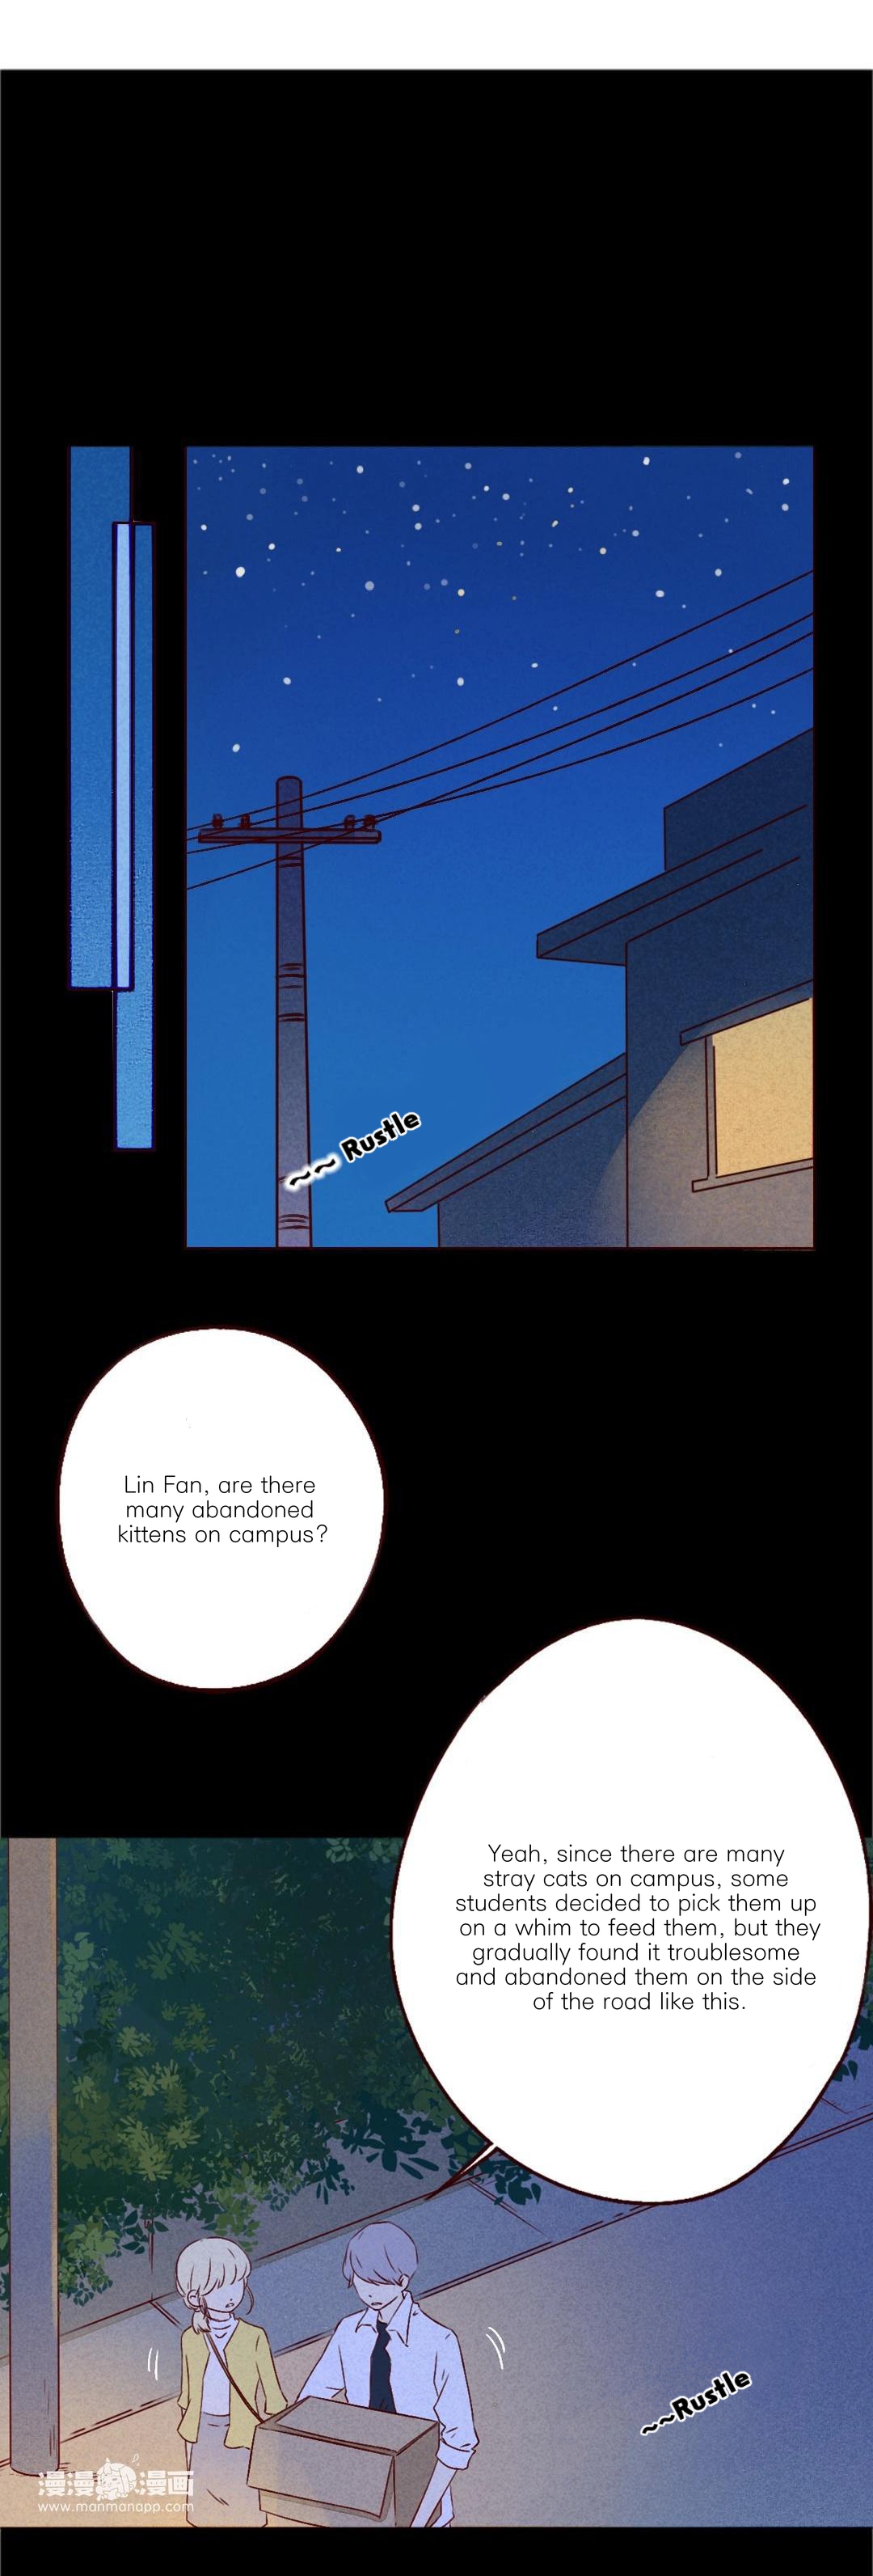 That Year, Under The Starry Sky - Page 2